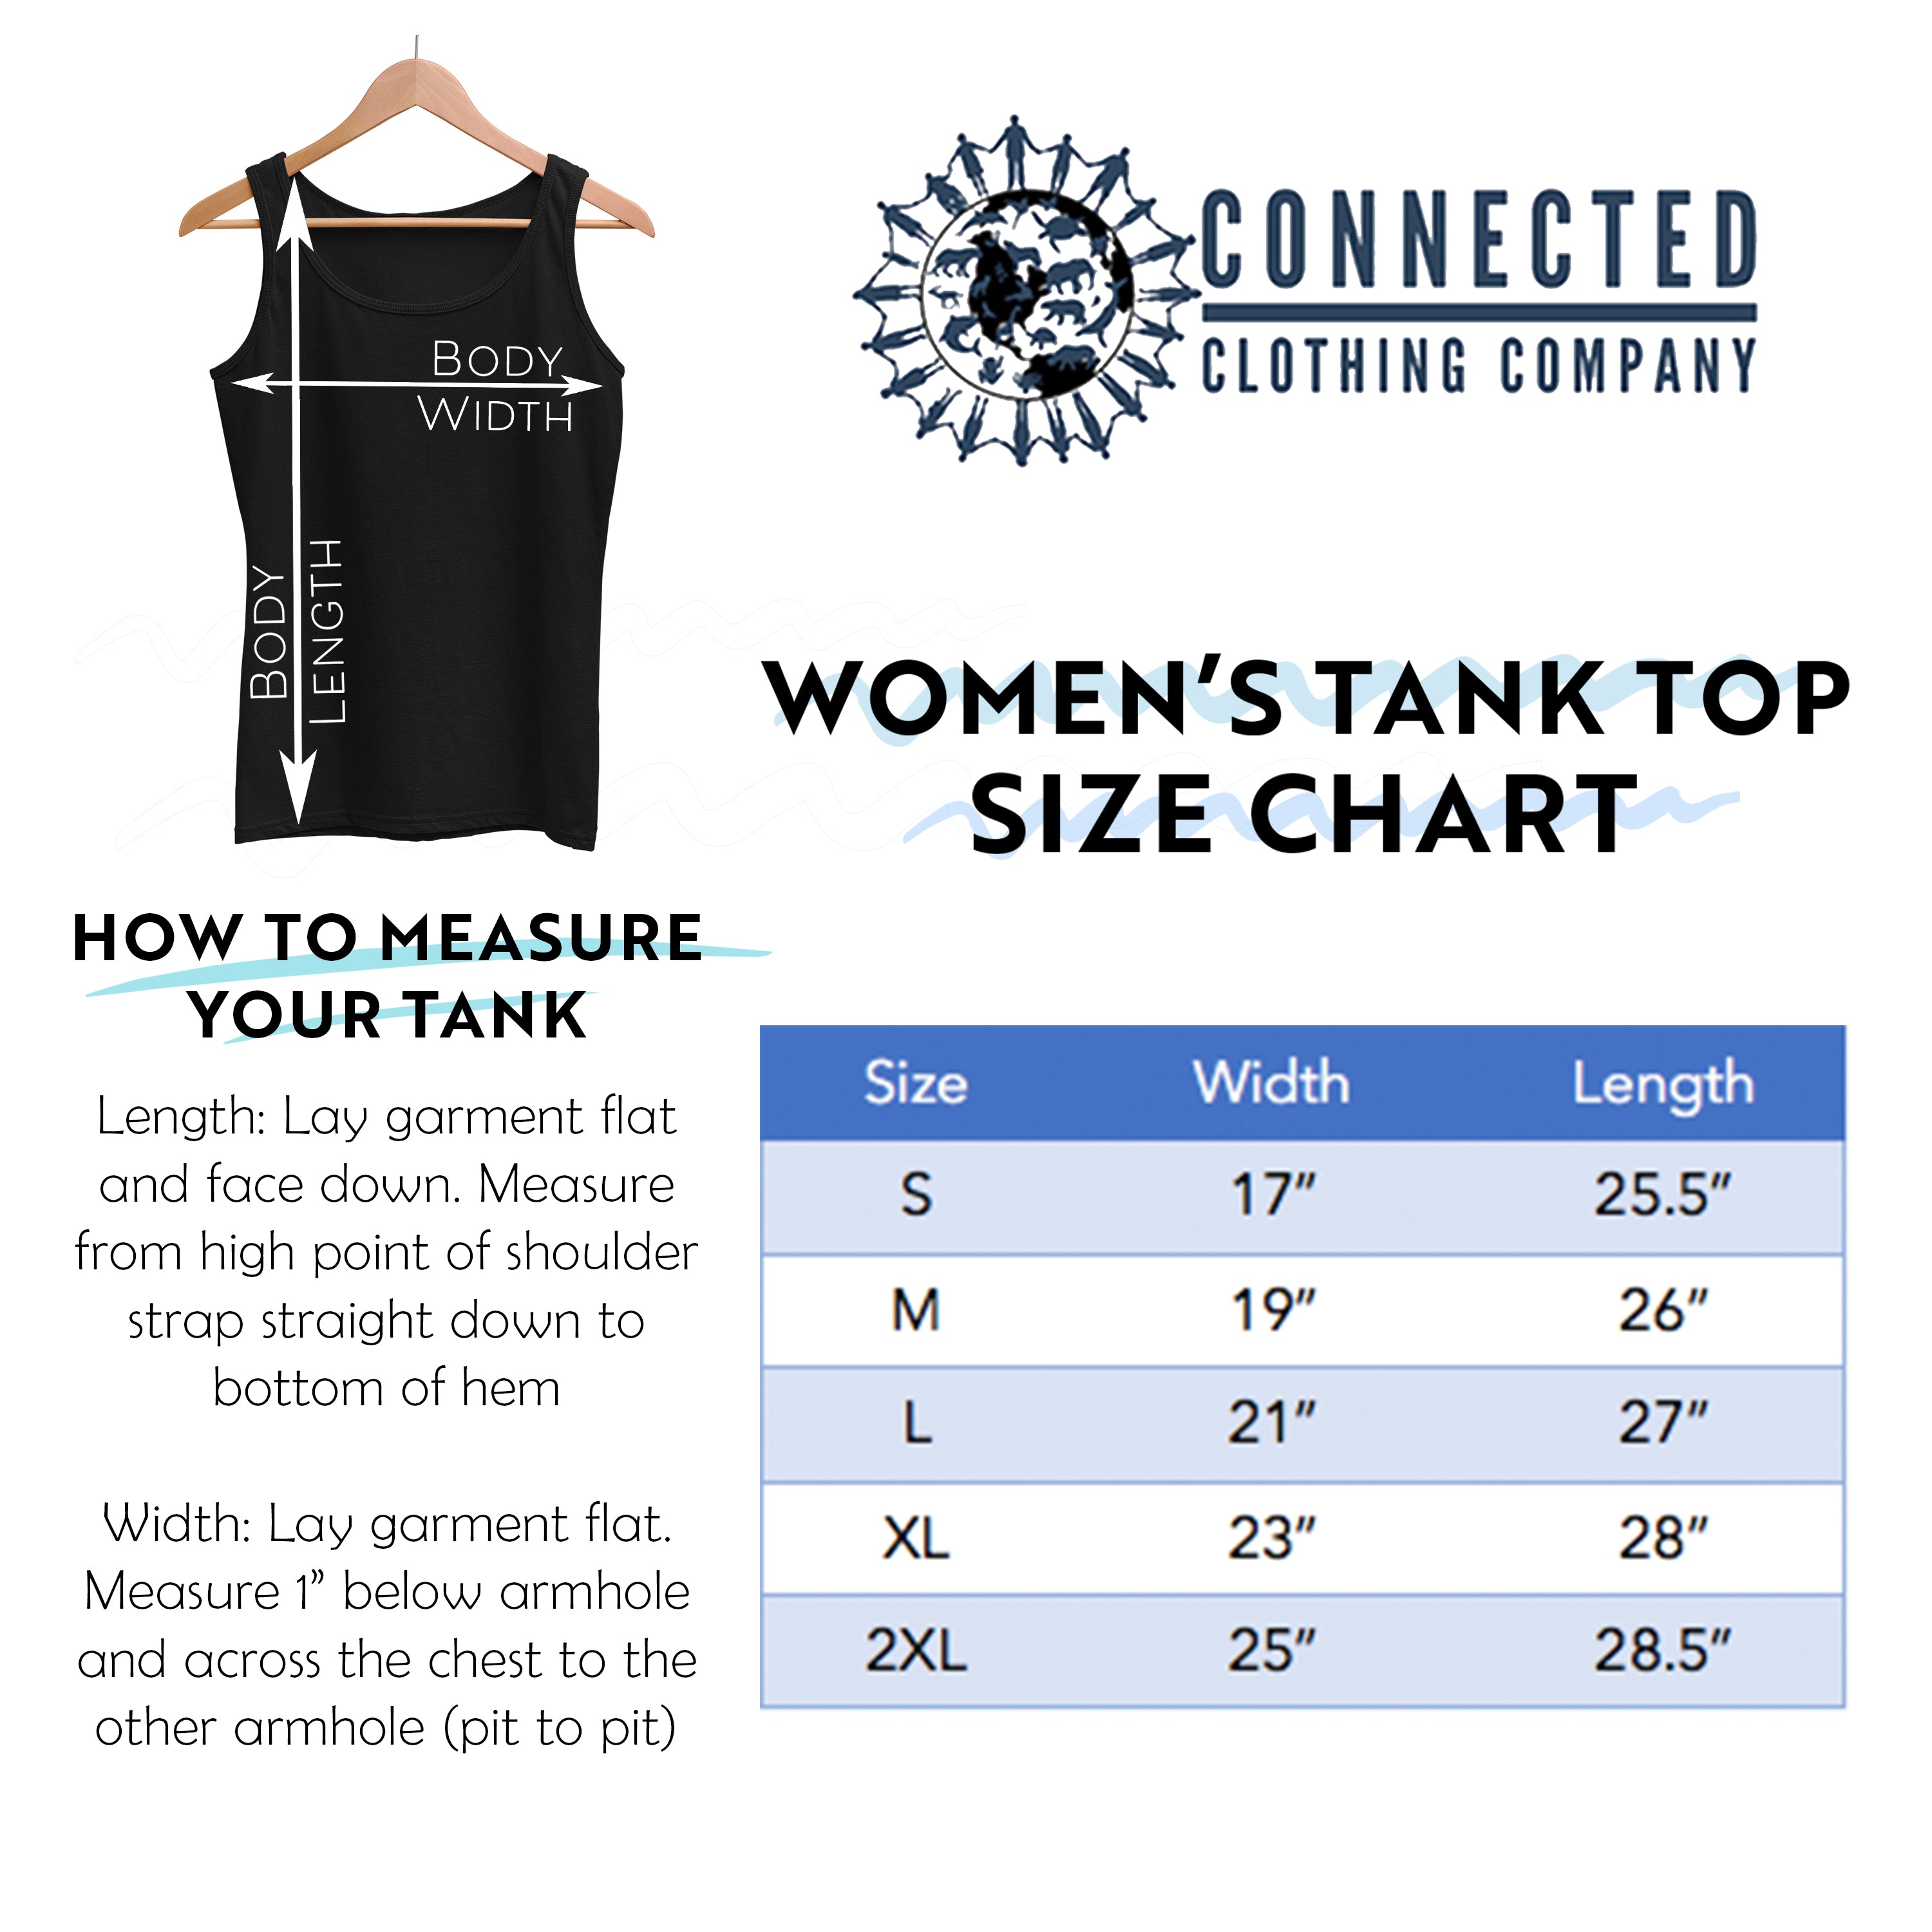 Women's Tank Top Size Chart - sharonkornman - Ethical & Sustainable Clothing